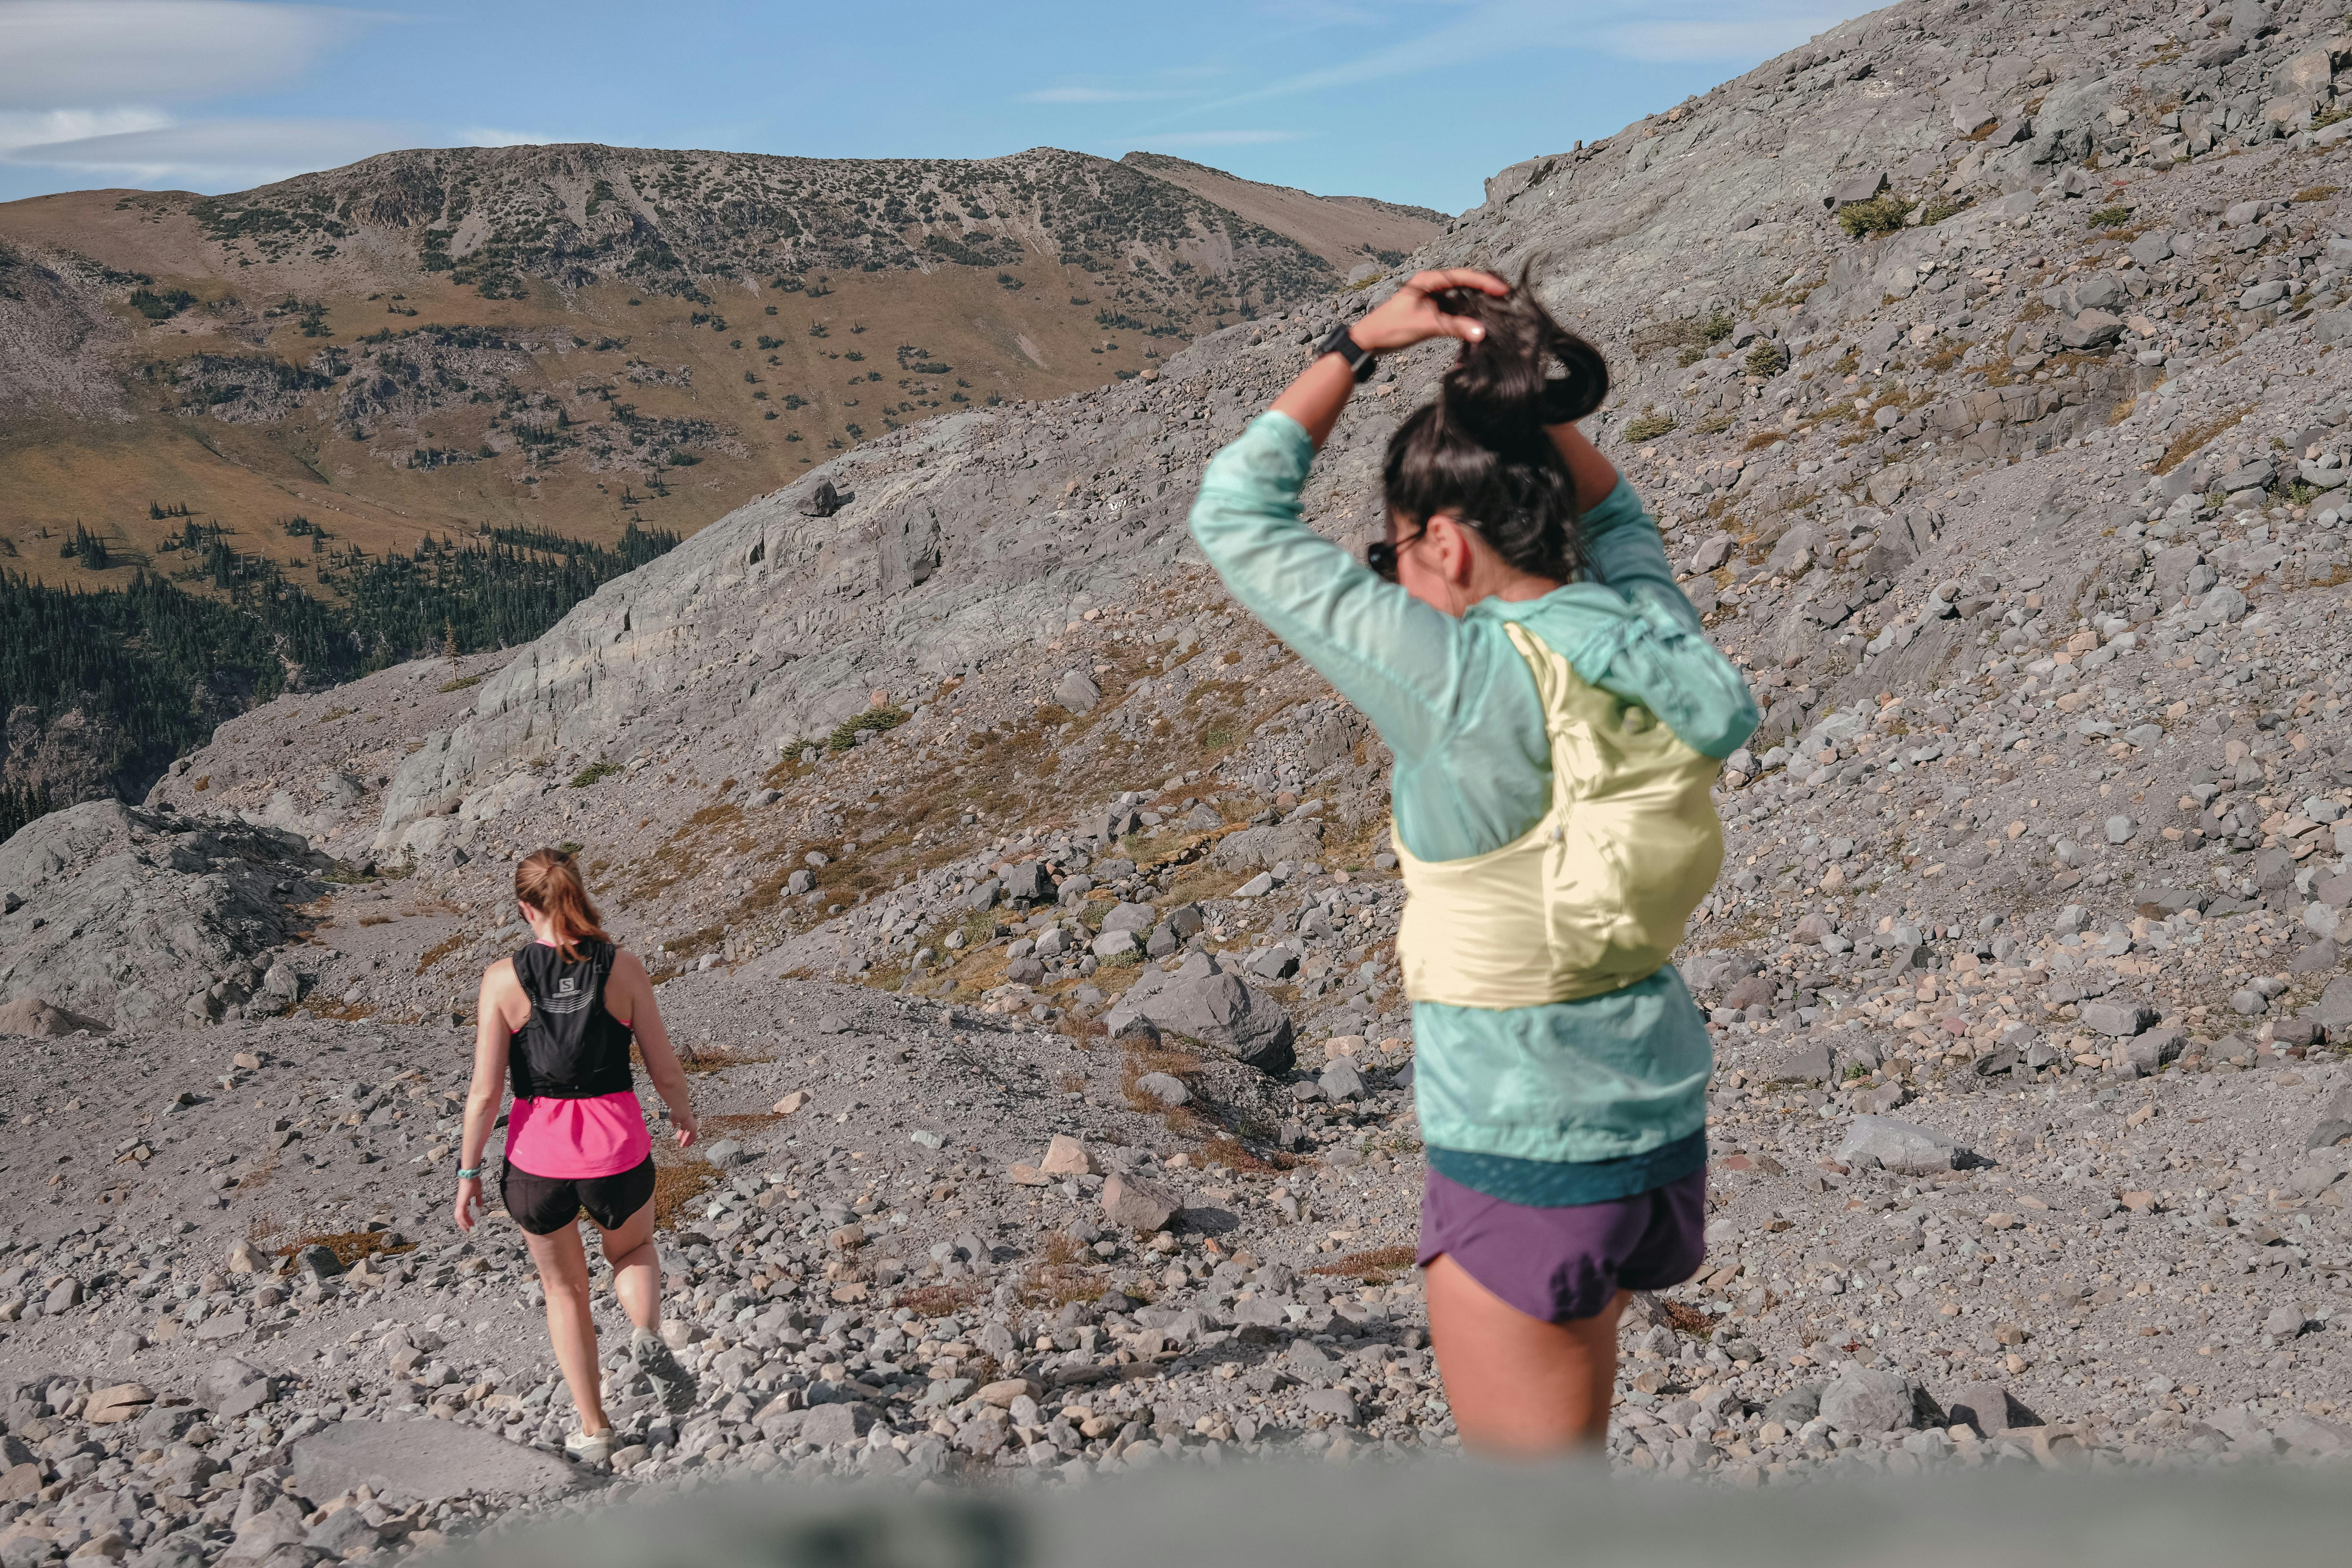 Two women with trail running vests on are on a trail with mountains in the background.